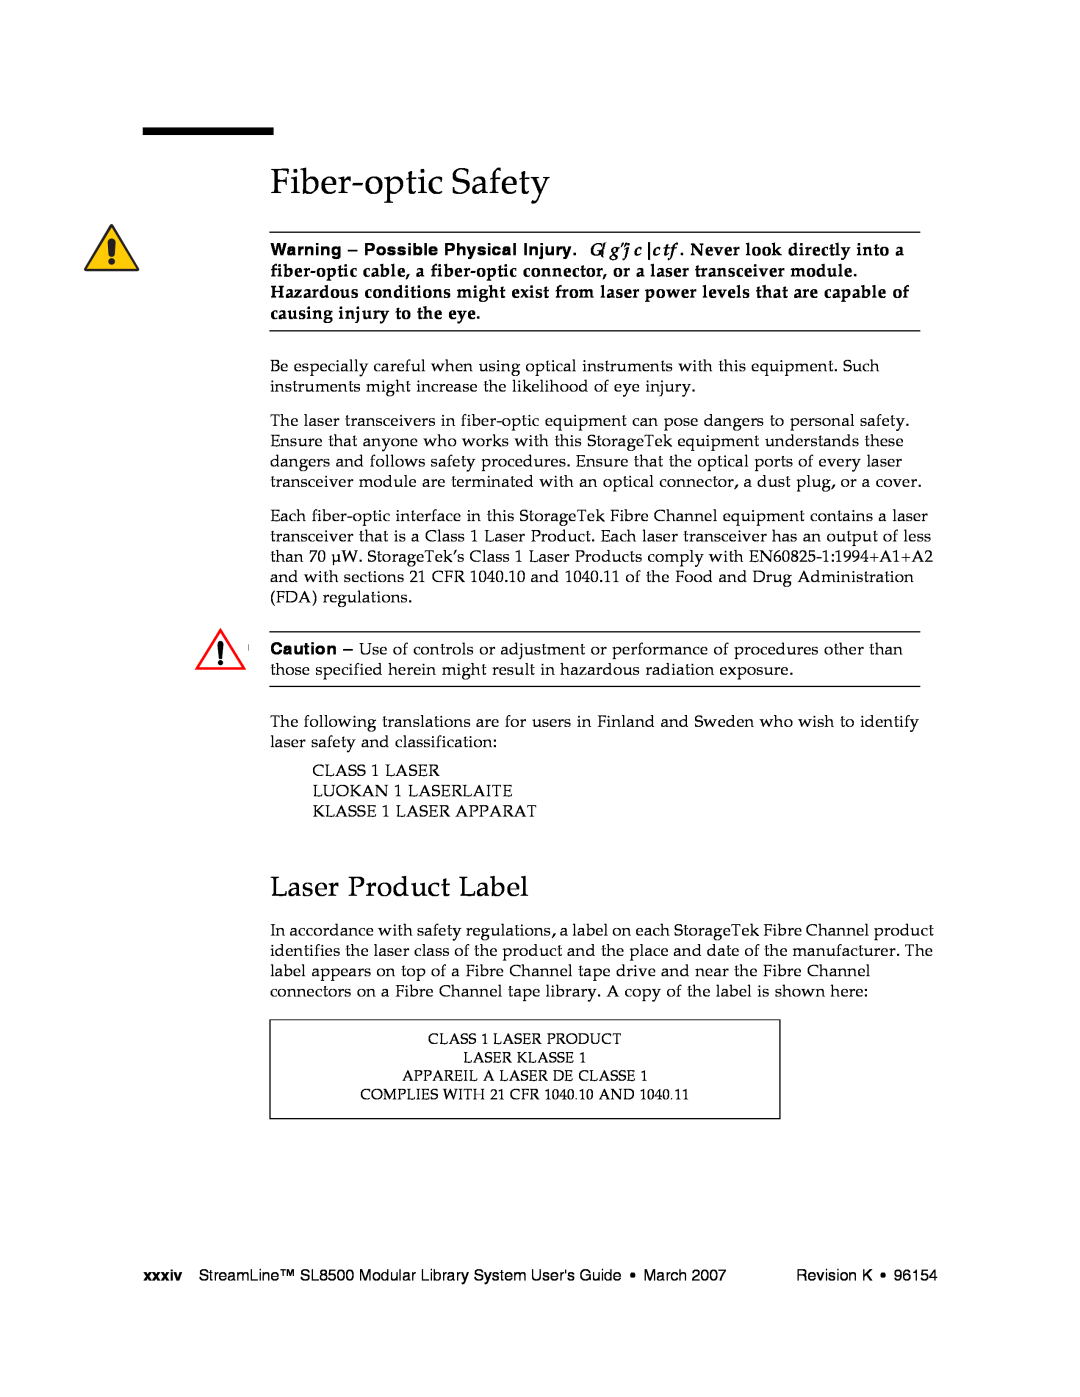 Sun Microsystems SL8500 manual Fiber-optic Safety, Laser Product Label 